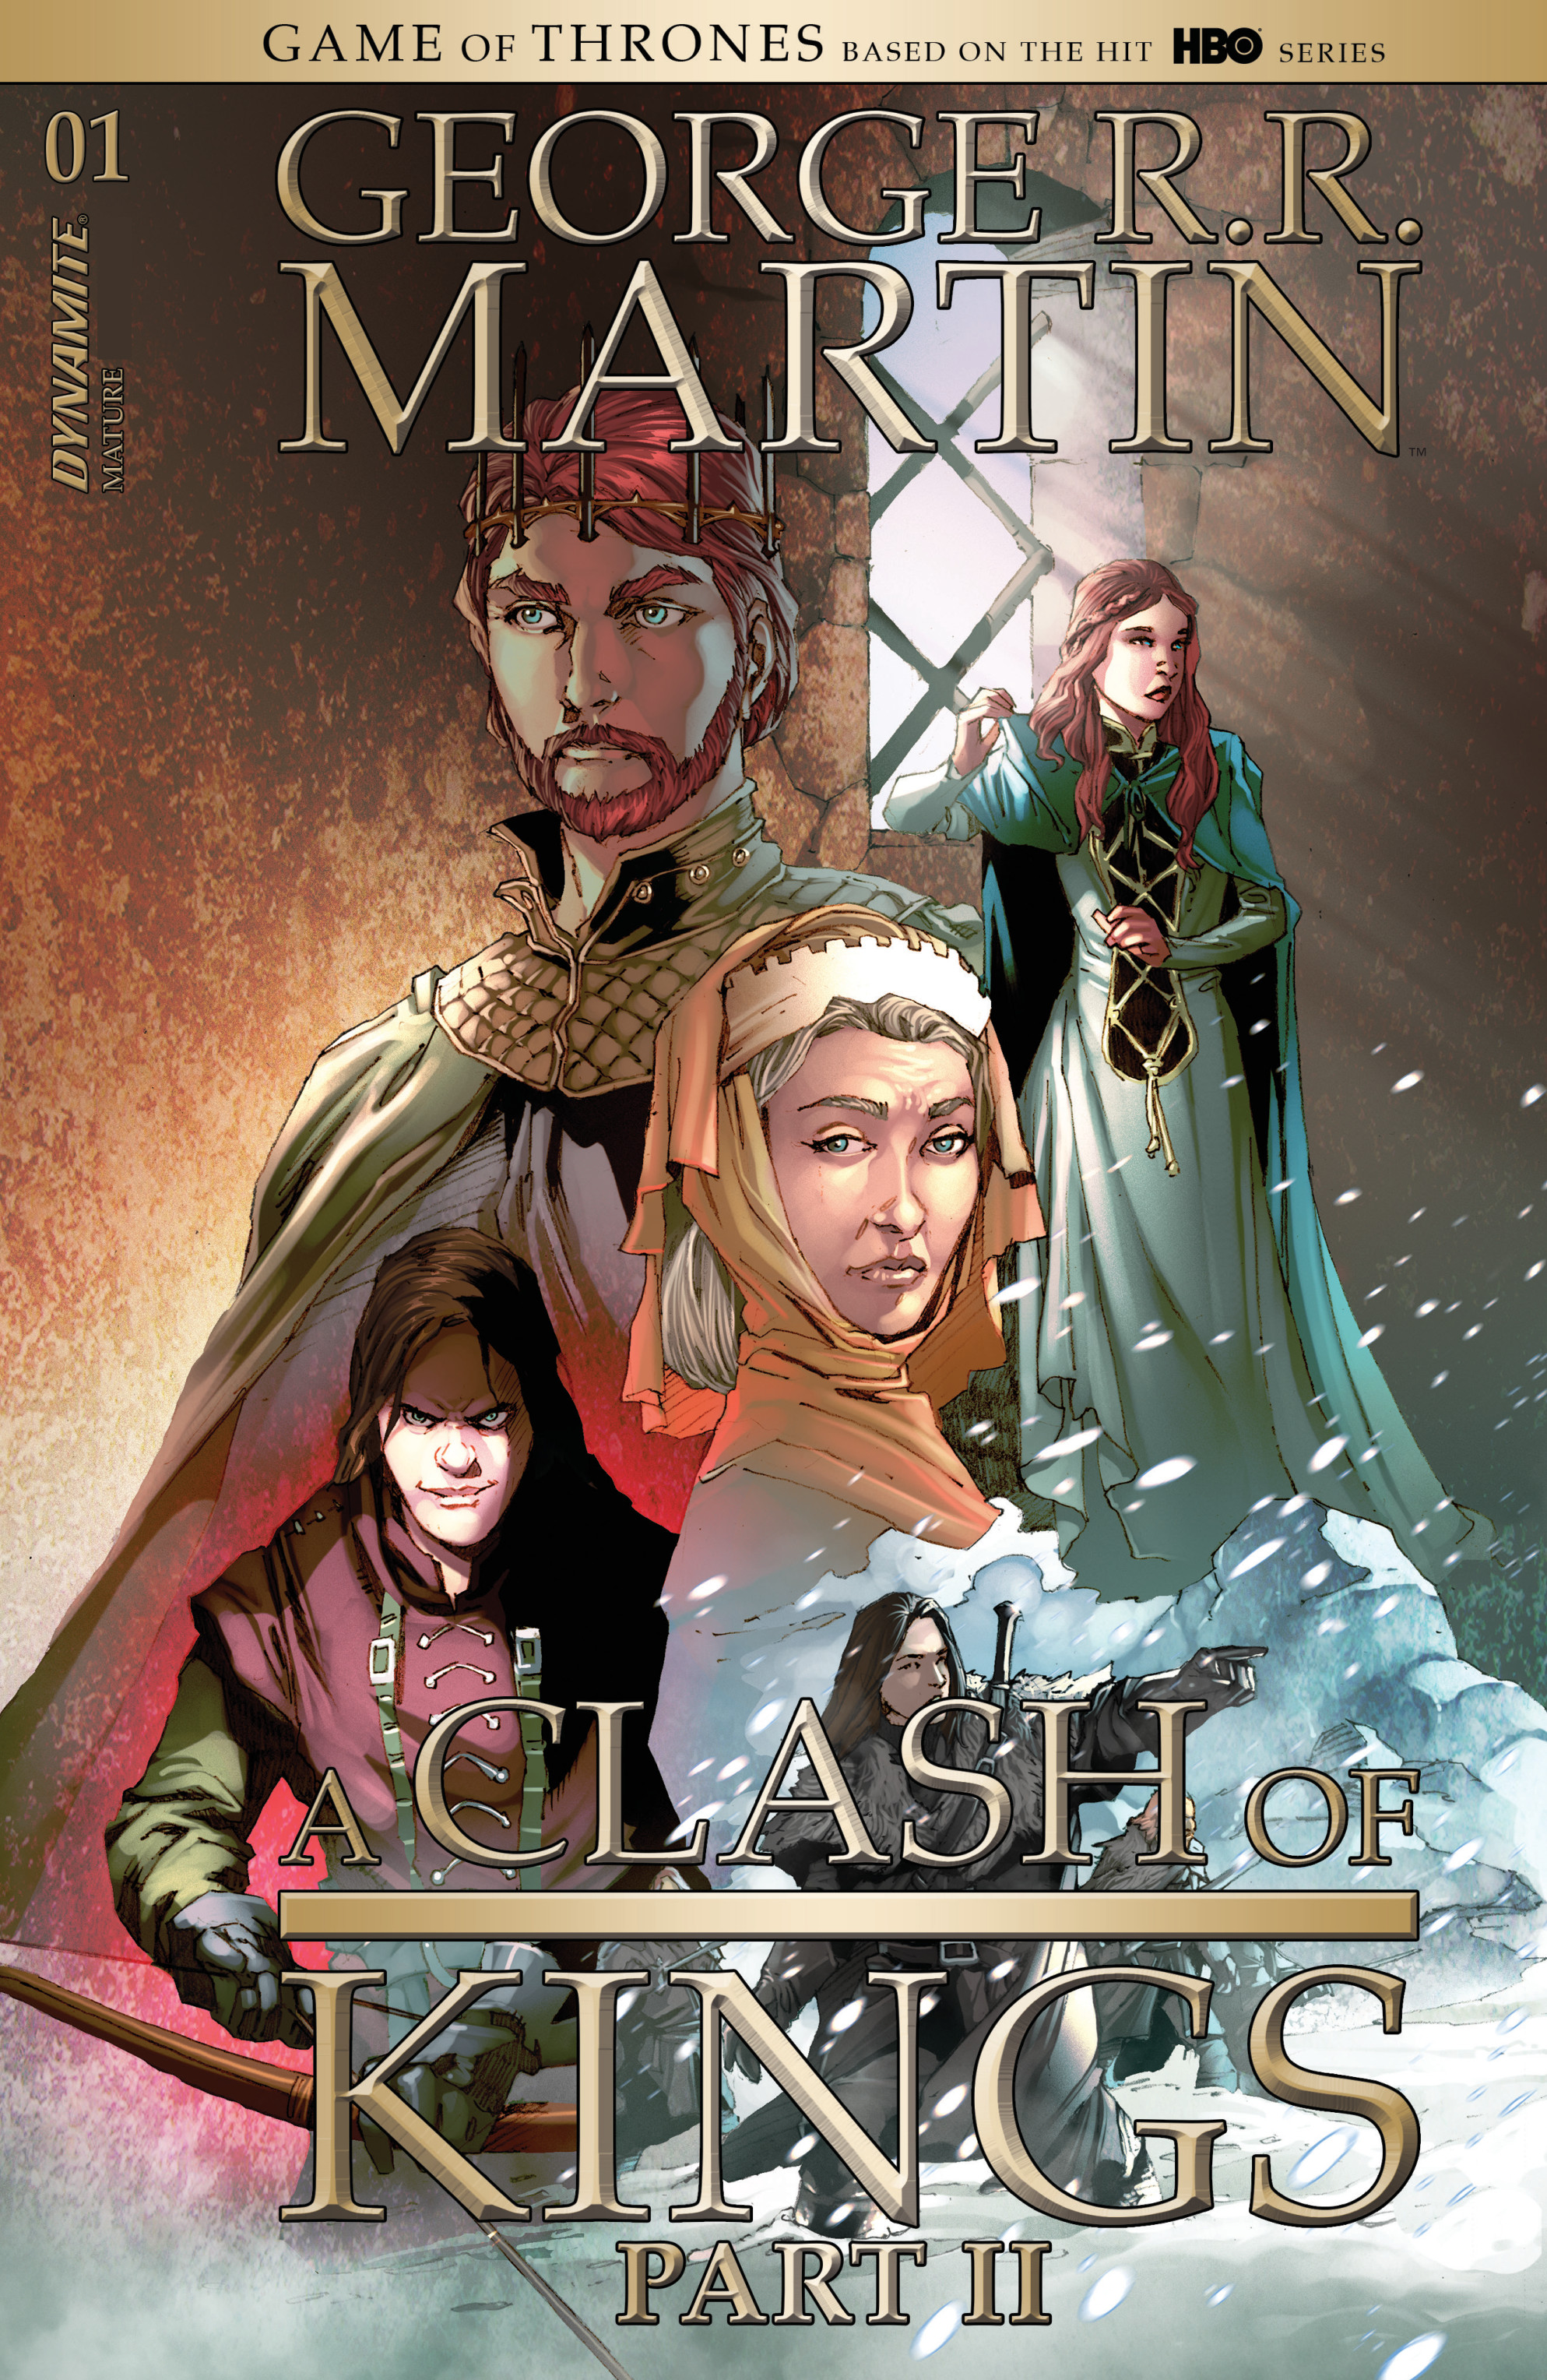 a clash of kings graphic novel volume one